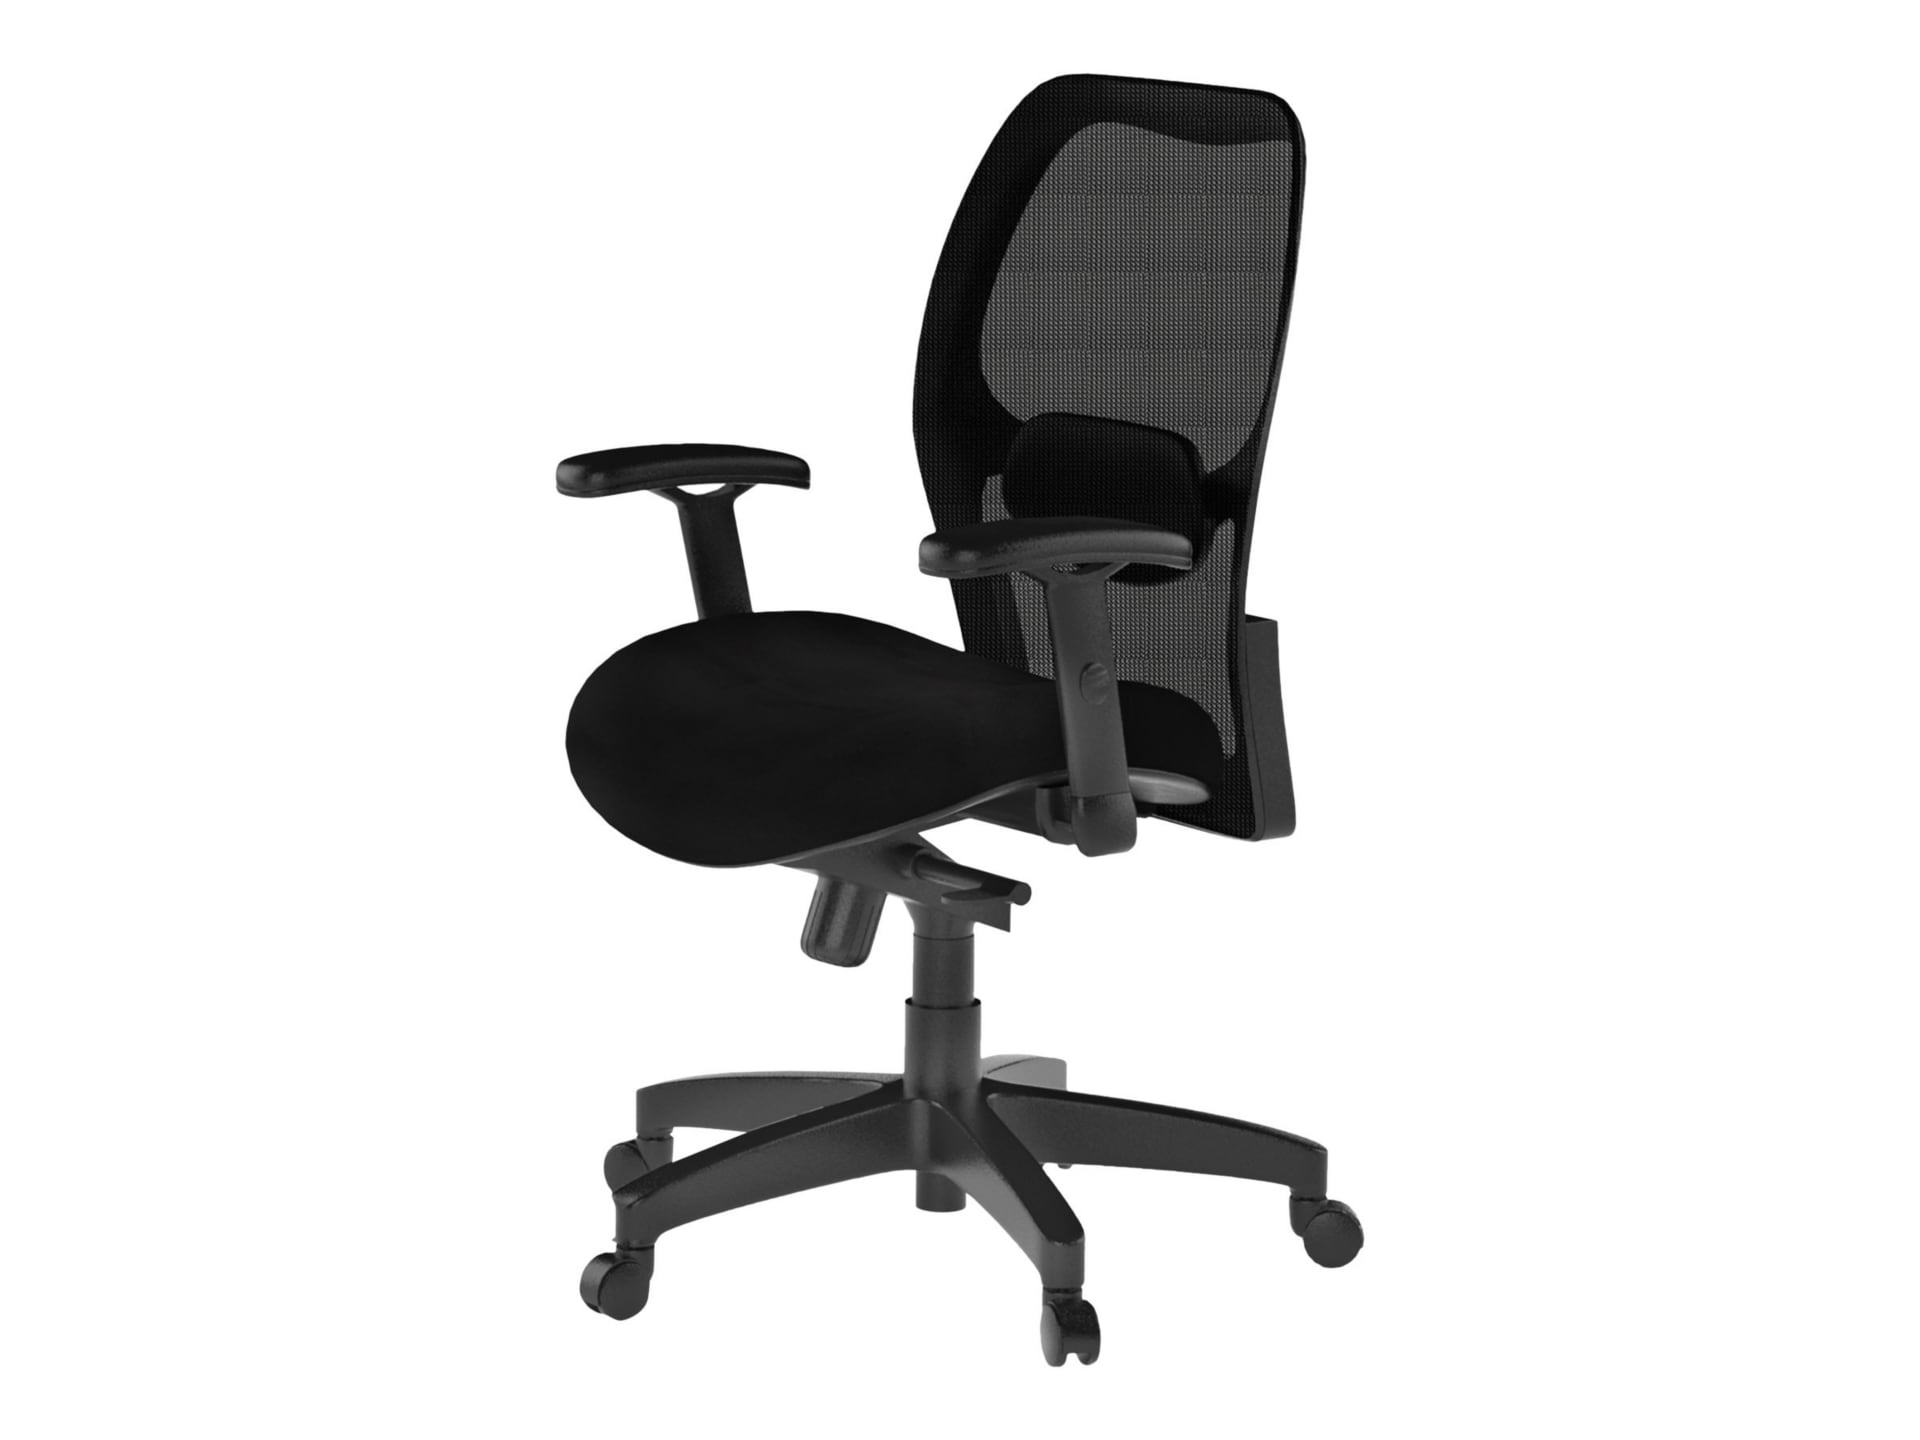 Safco - chair - black